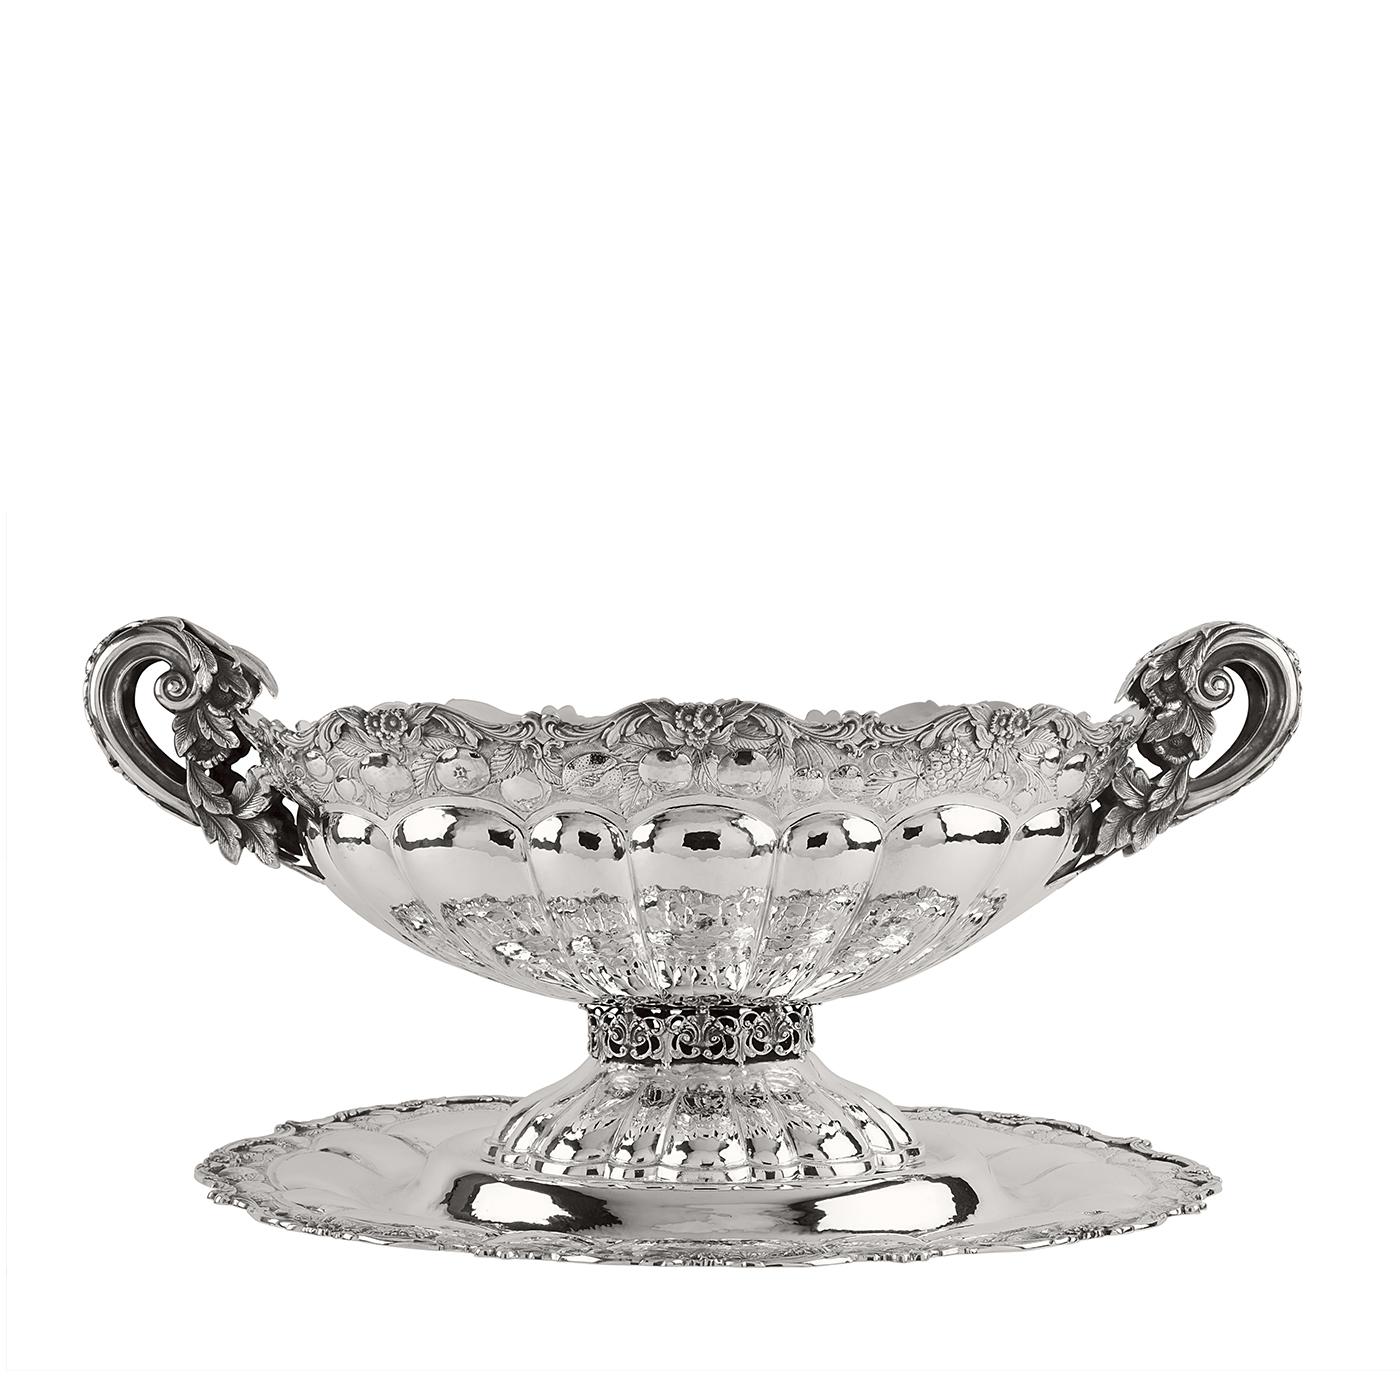 This trophy-shaped cup is part of the Frutta collection and, like the other pieces in the series, is made entirely in silver with chiseled decorations depicting a variety of fruits and leaves vividly rendered and adorning the surfaces of the pieces.